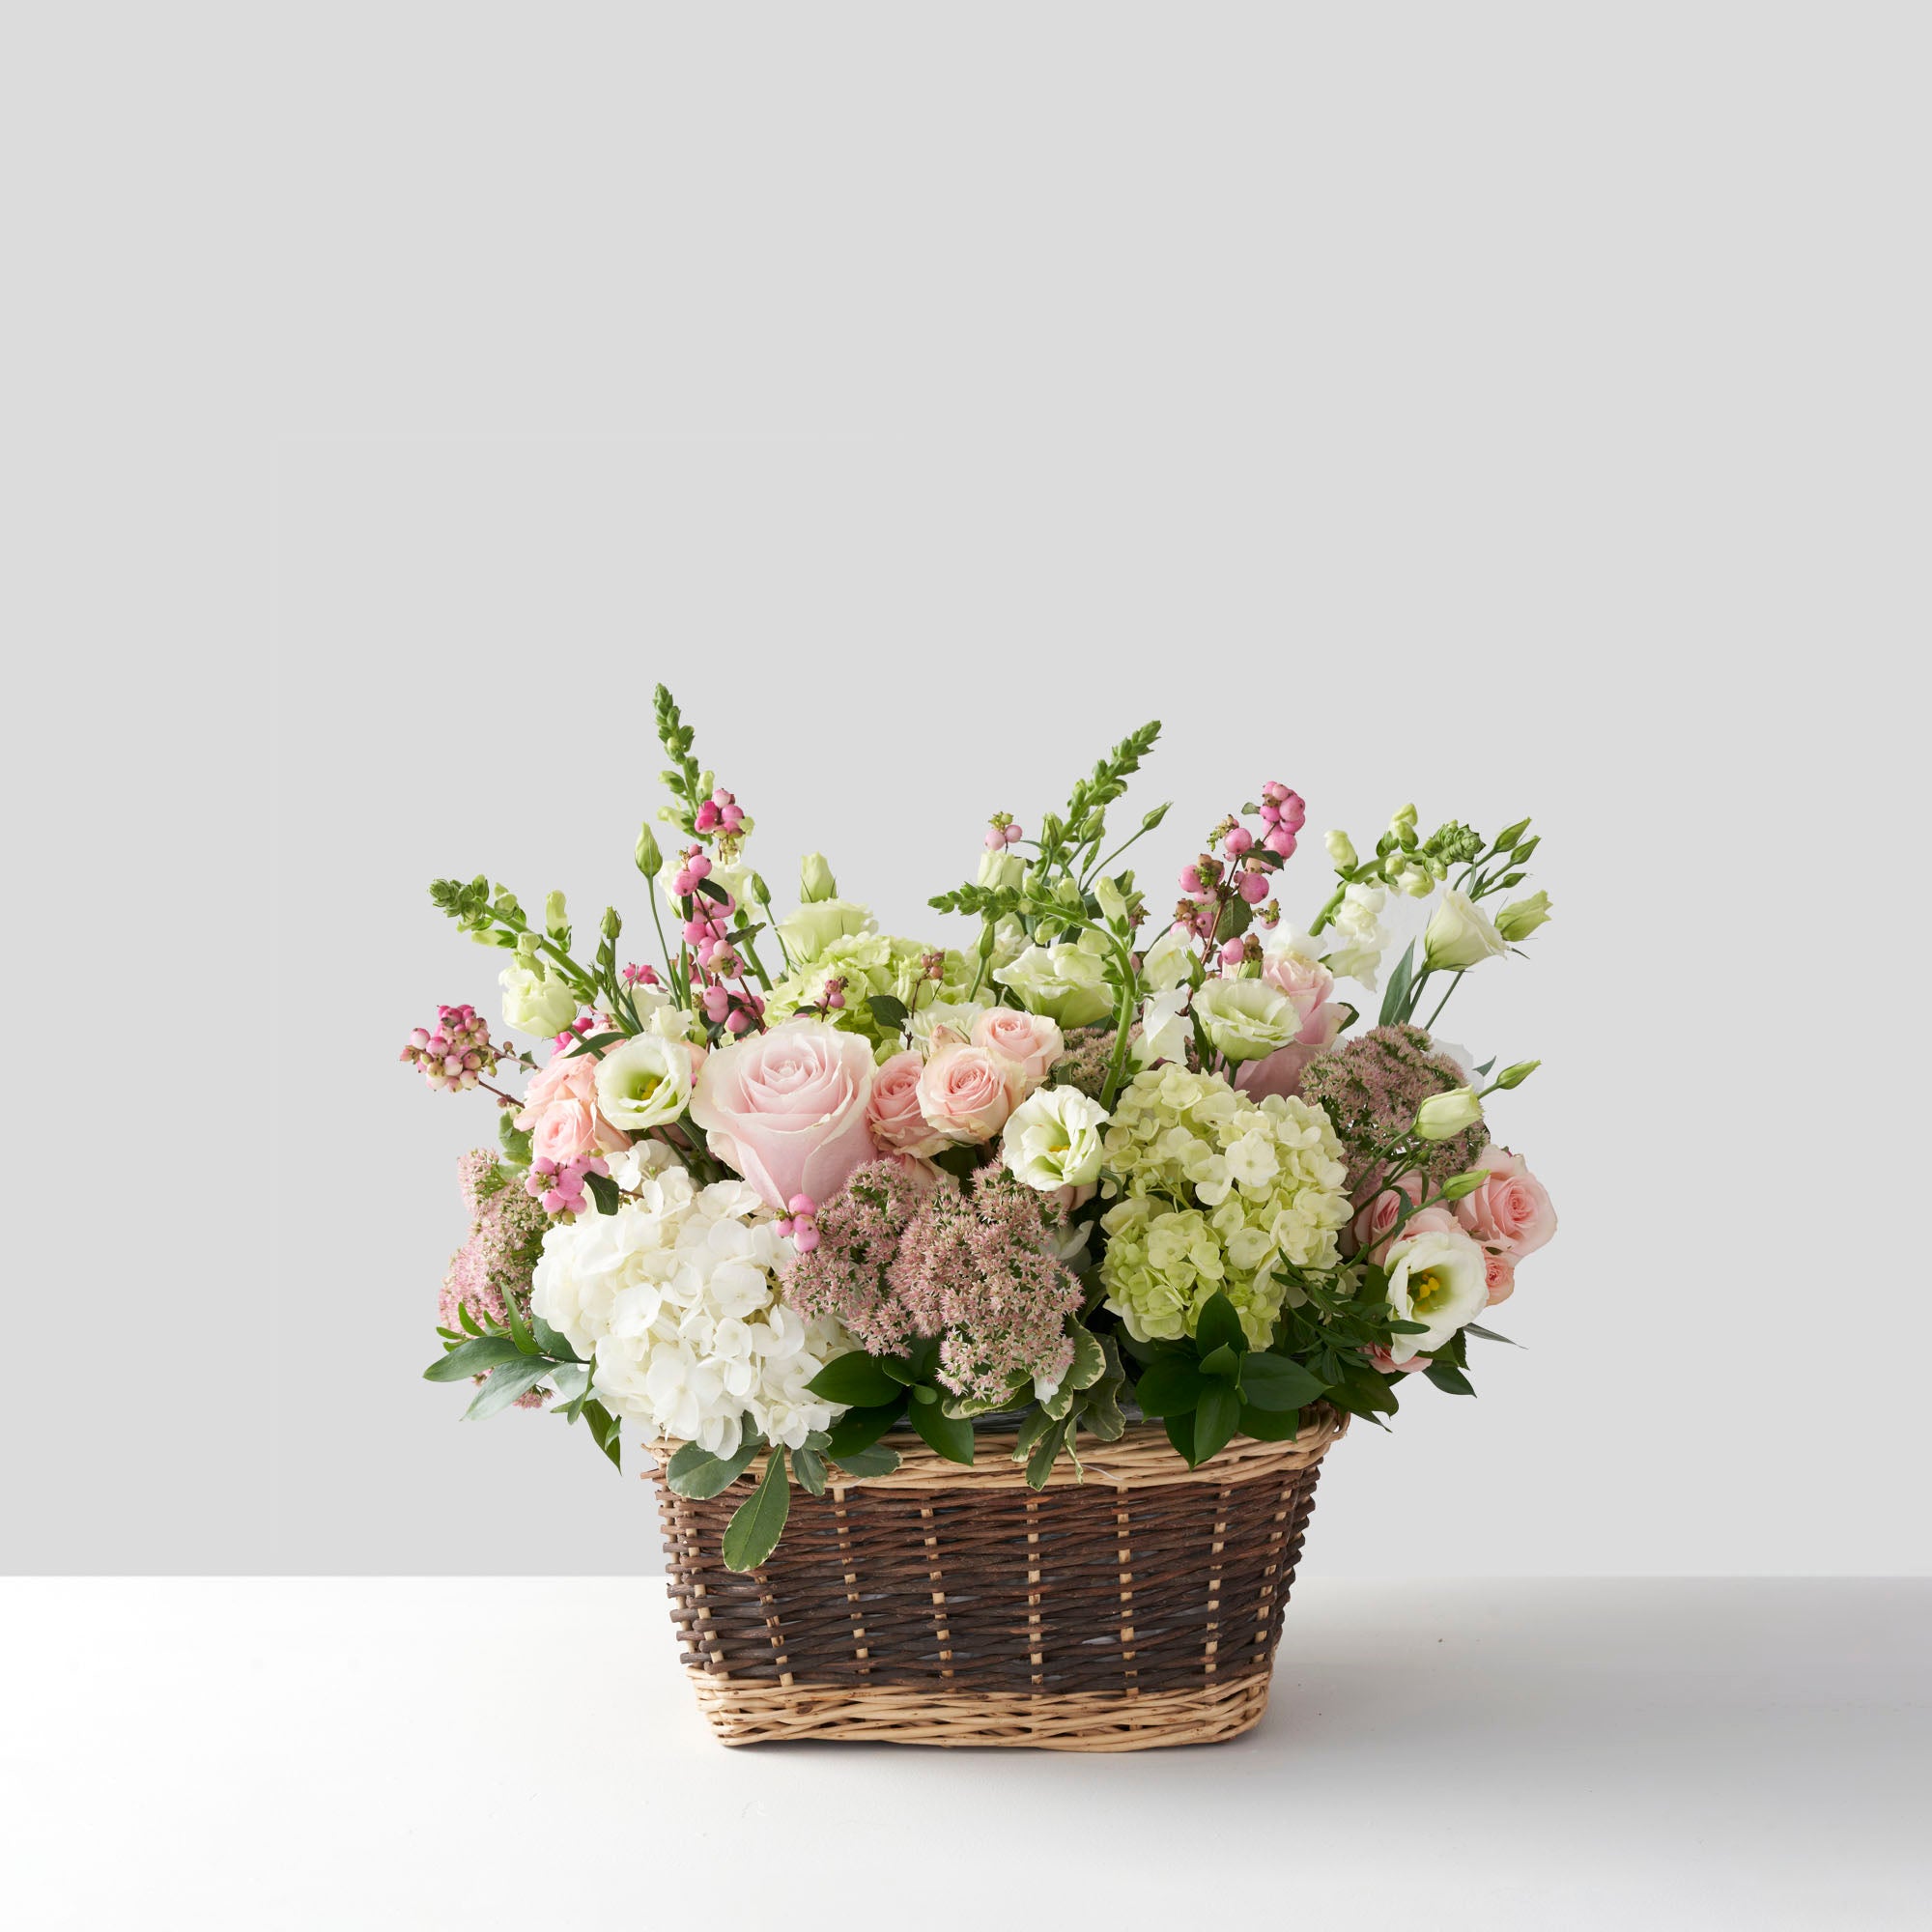 Flower arrangement of soft pink, white, and pale green, in natural basket.